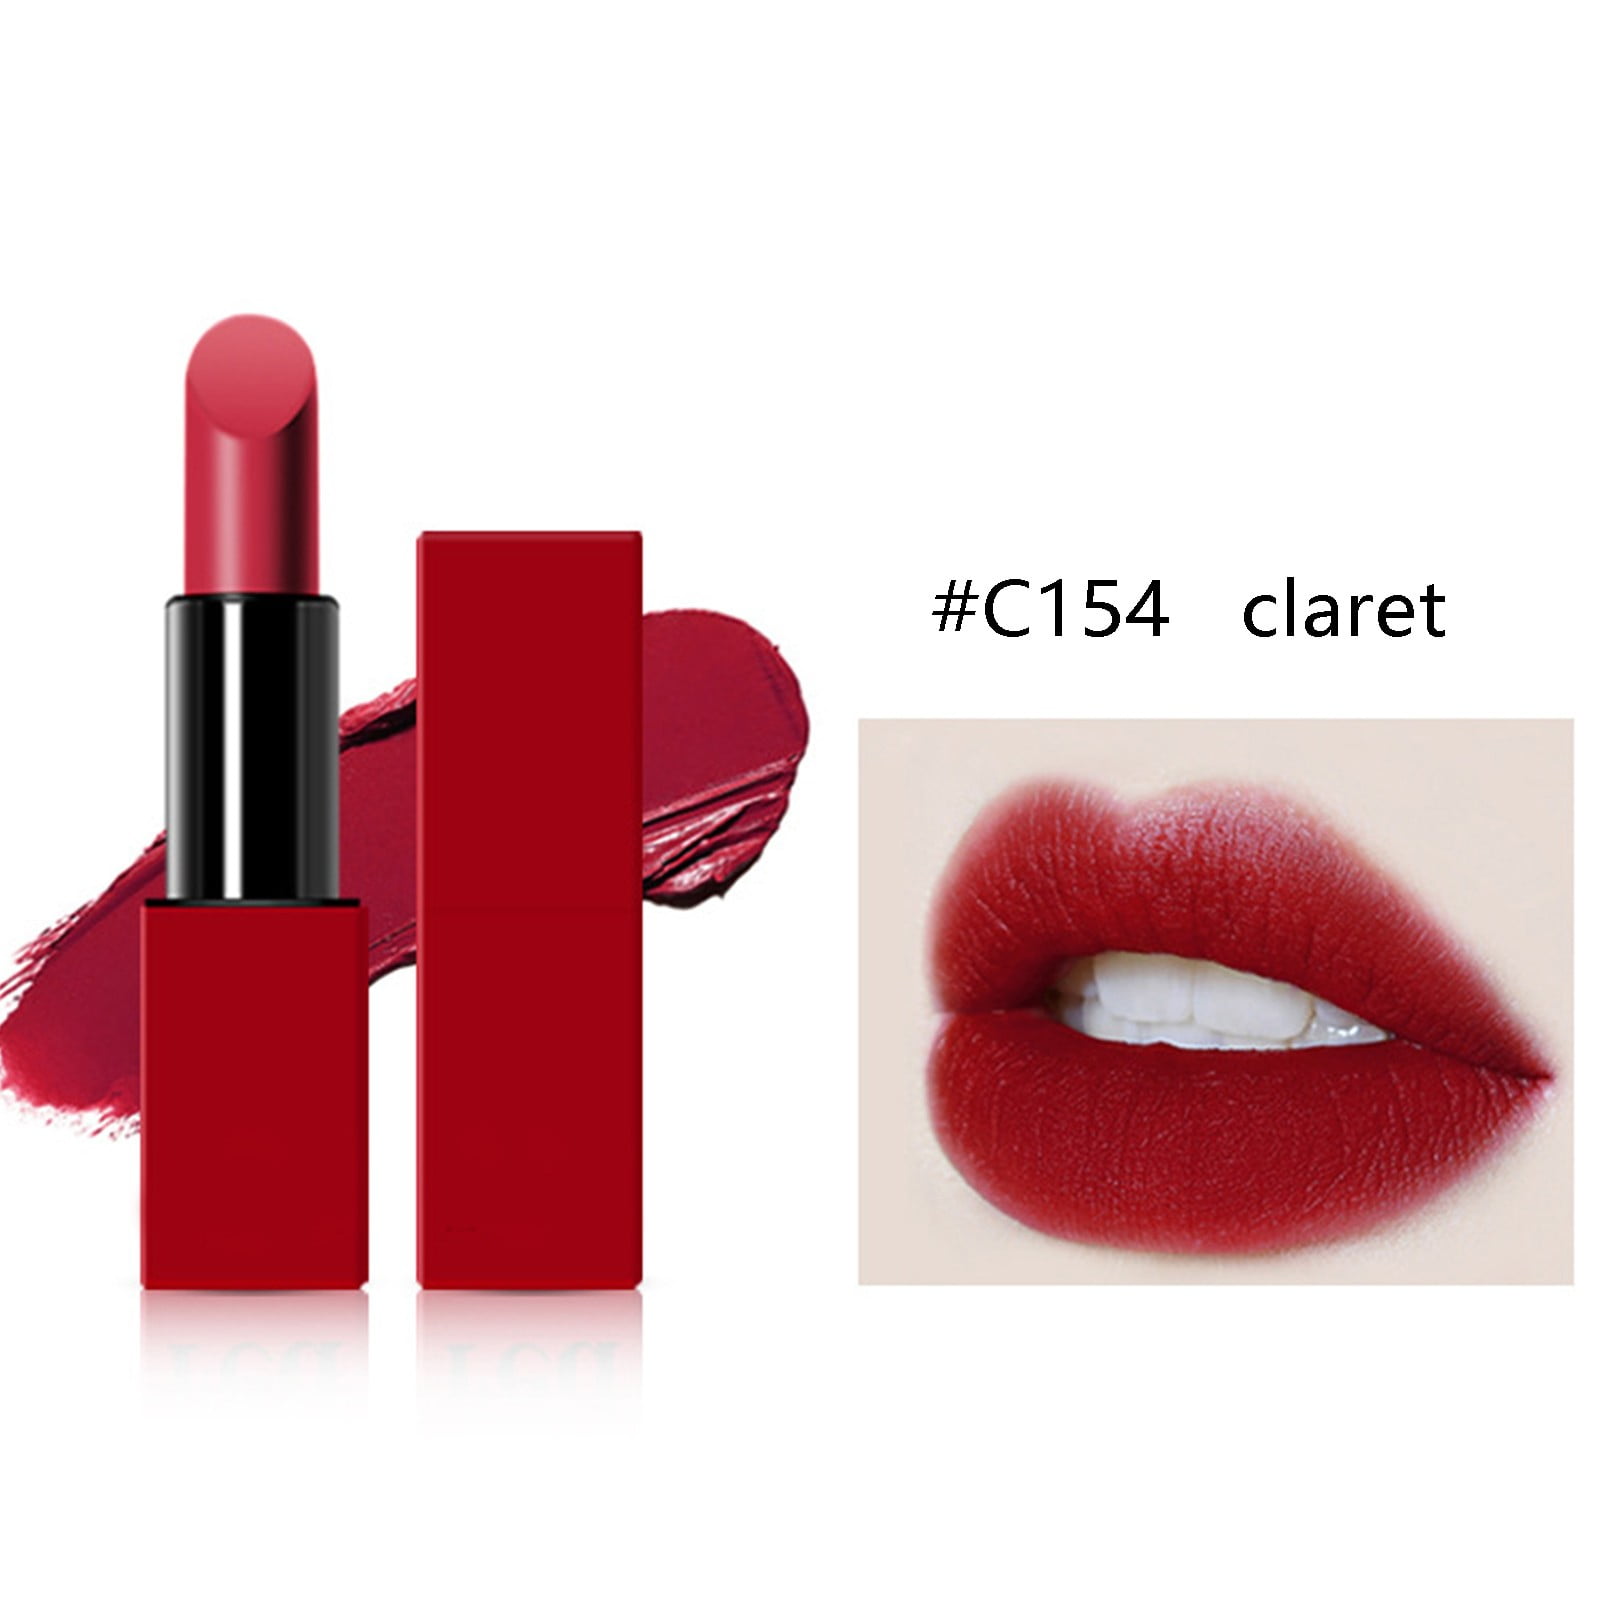 Ykohkofe Red Lip Gloss Mattes Mattes Lipstick Velvet Red China Red Lipstick  10 Colors Makeup Suitable For Any Skin Type